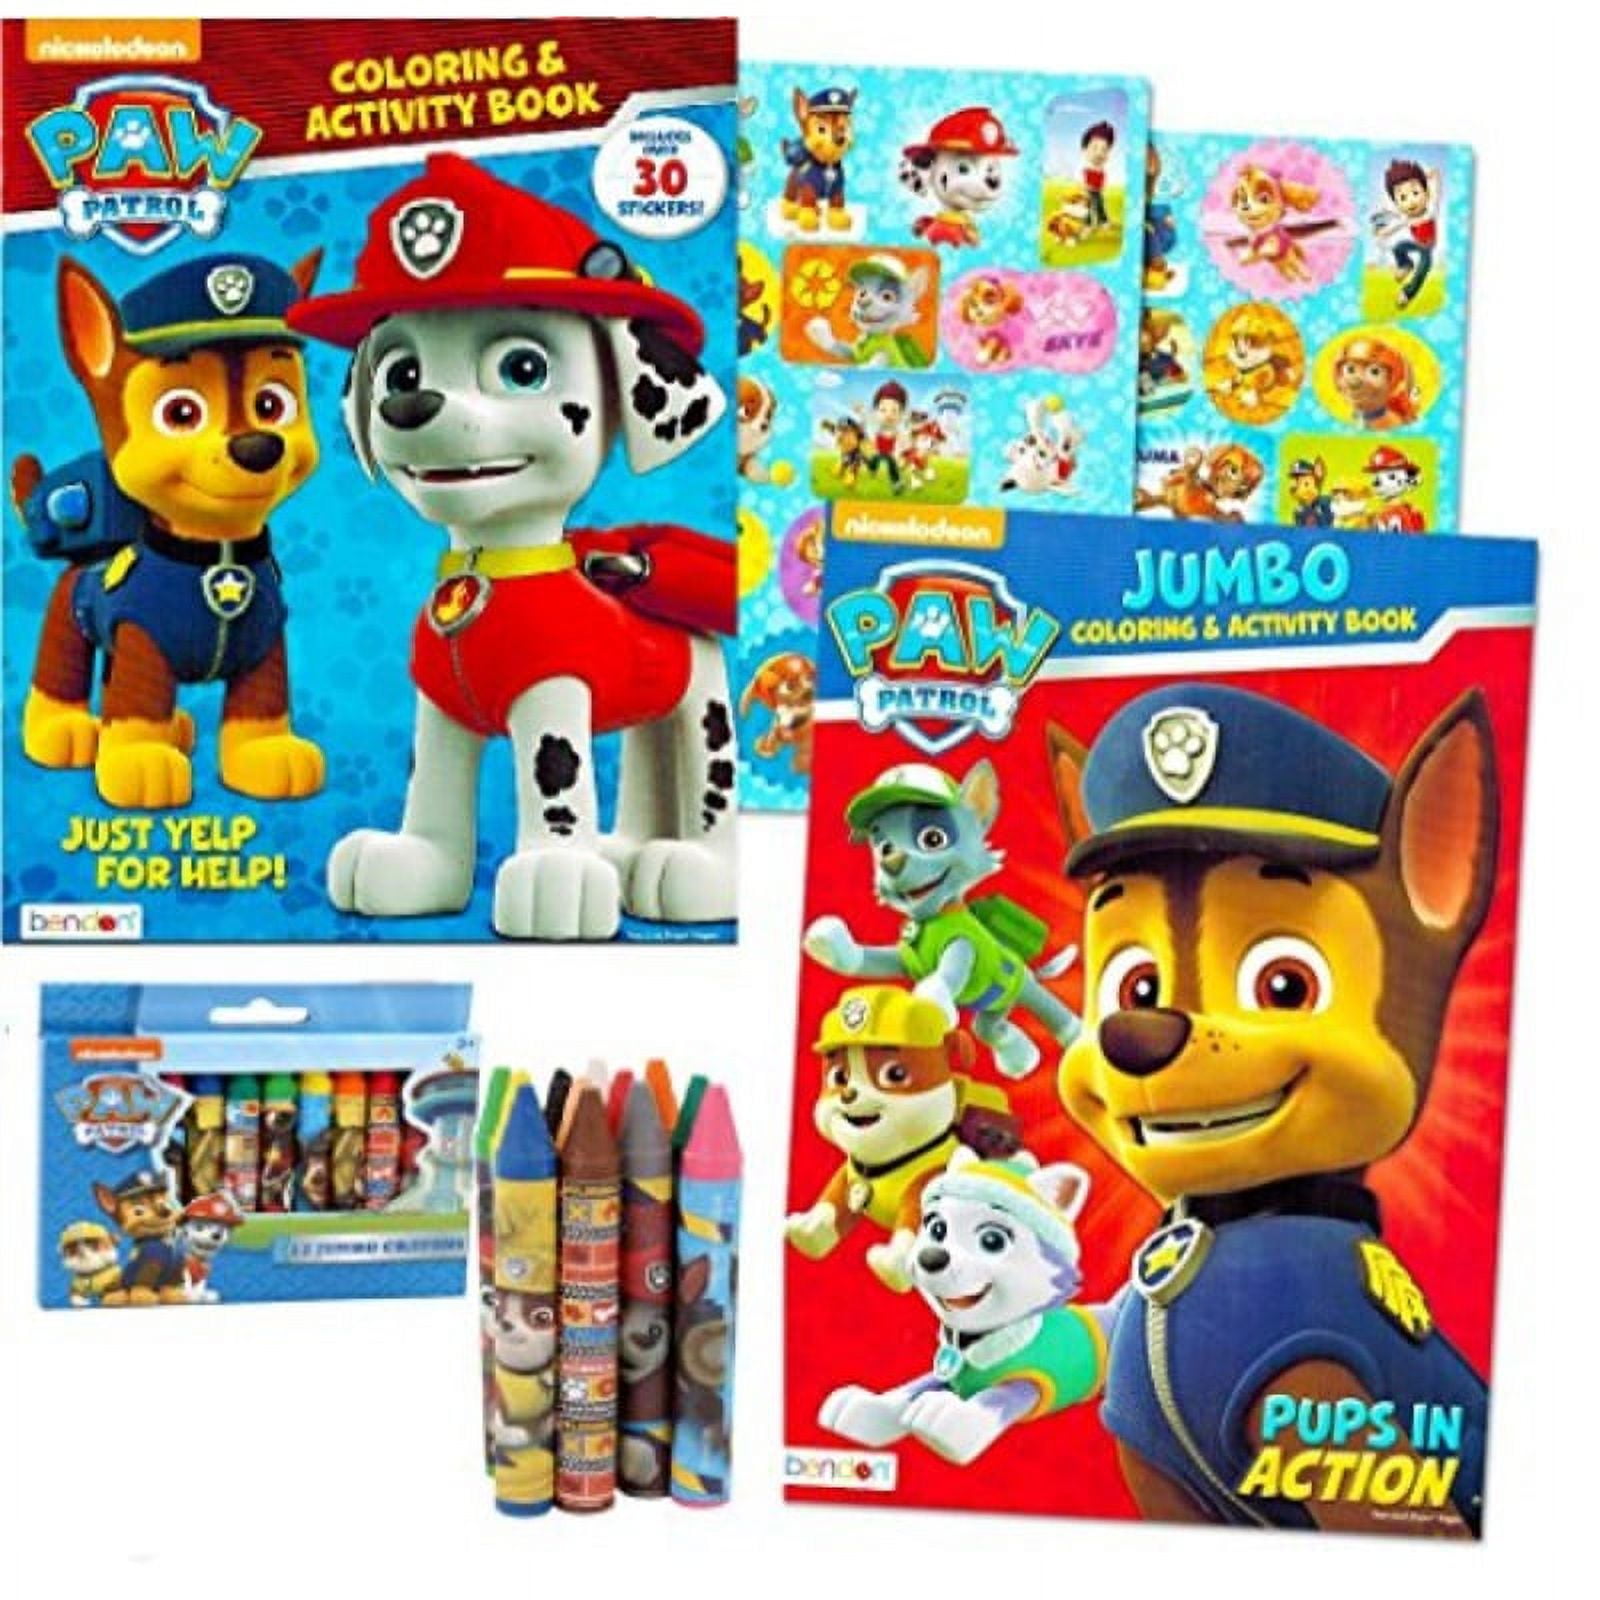 12 Bulk Coloring Books for Toddler Boys Ages 2-4 - 12 Assorted Coloring  Books for Kids Featuring Transformers, Spongebob, Snoopy, Paw Patrol 